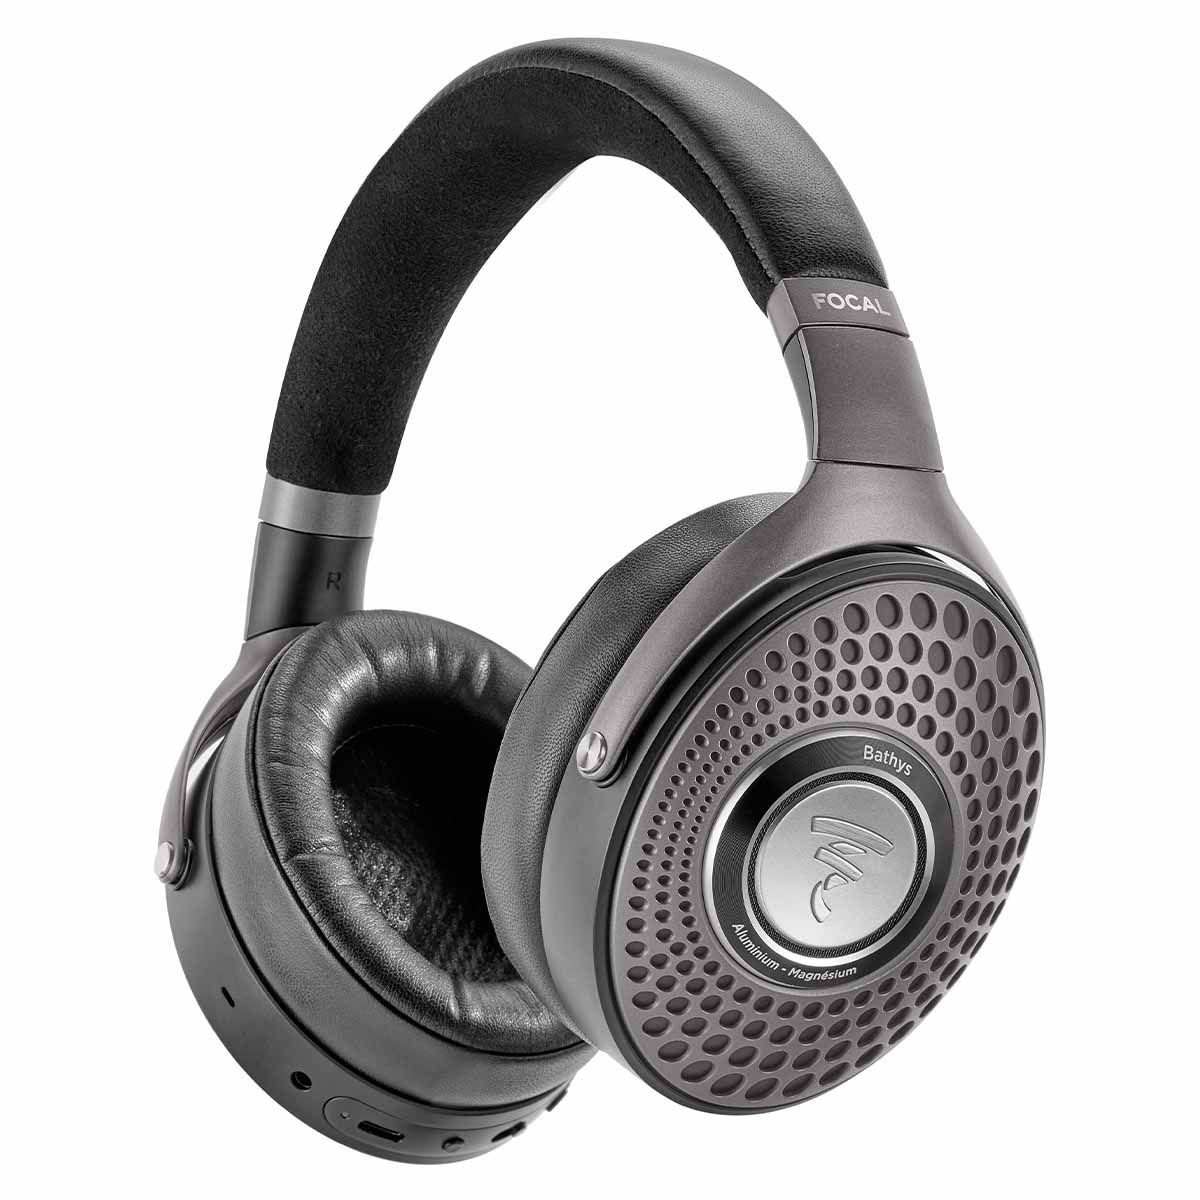 Focal Bathys Over Ear Noise Cancelling Headphones - angled view